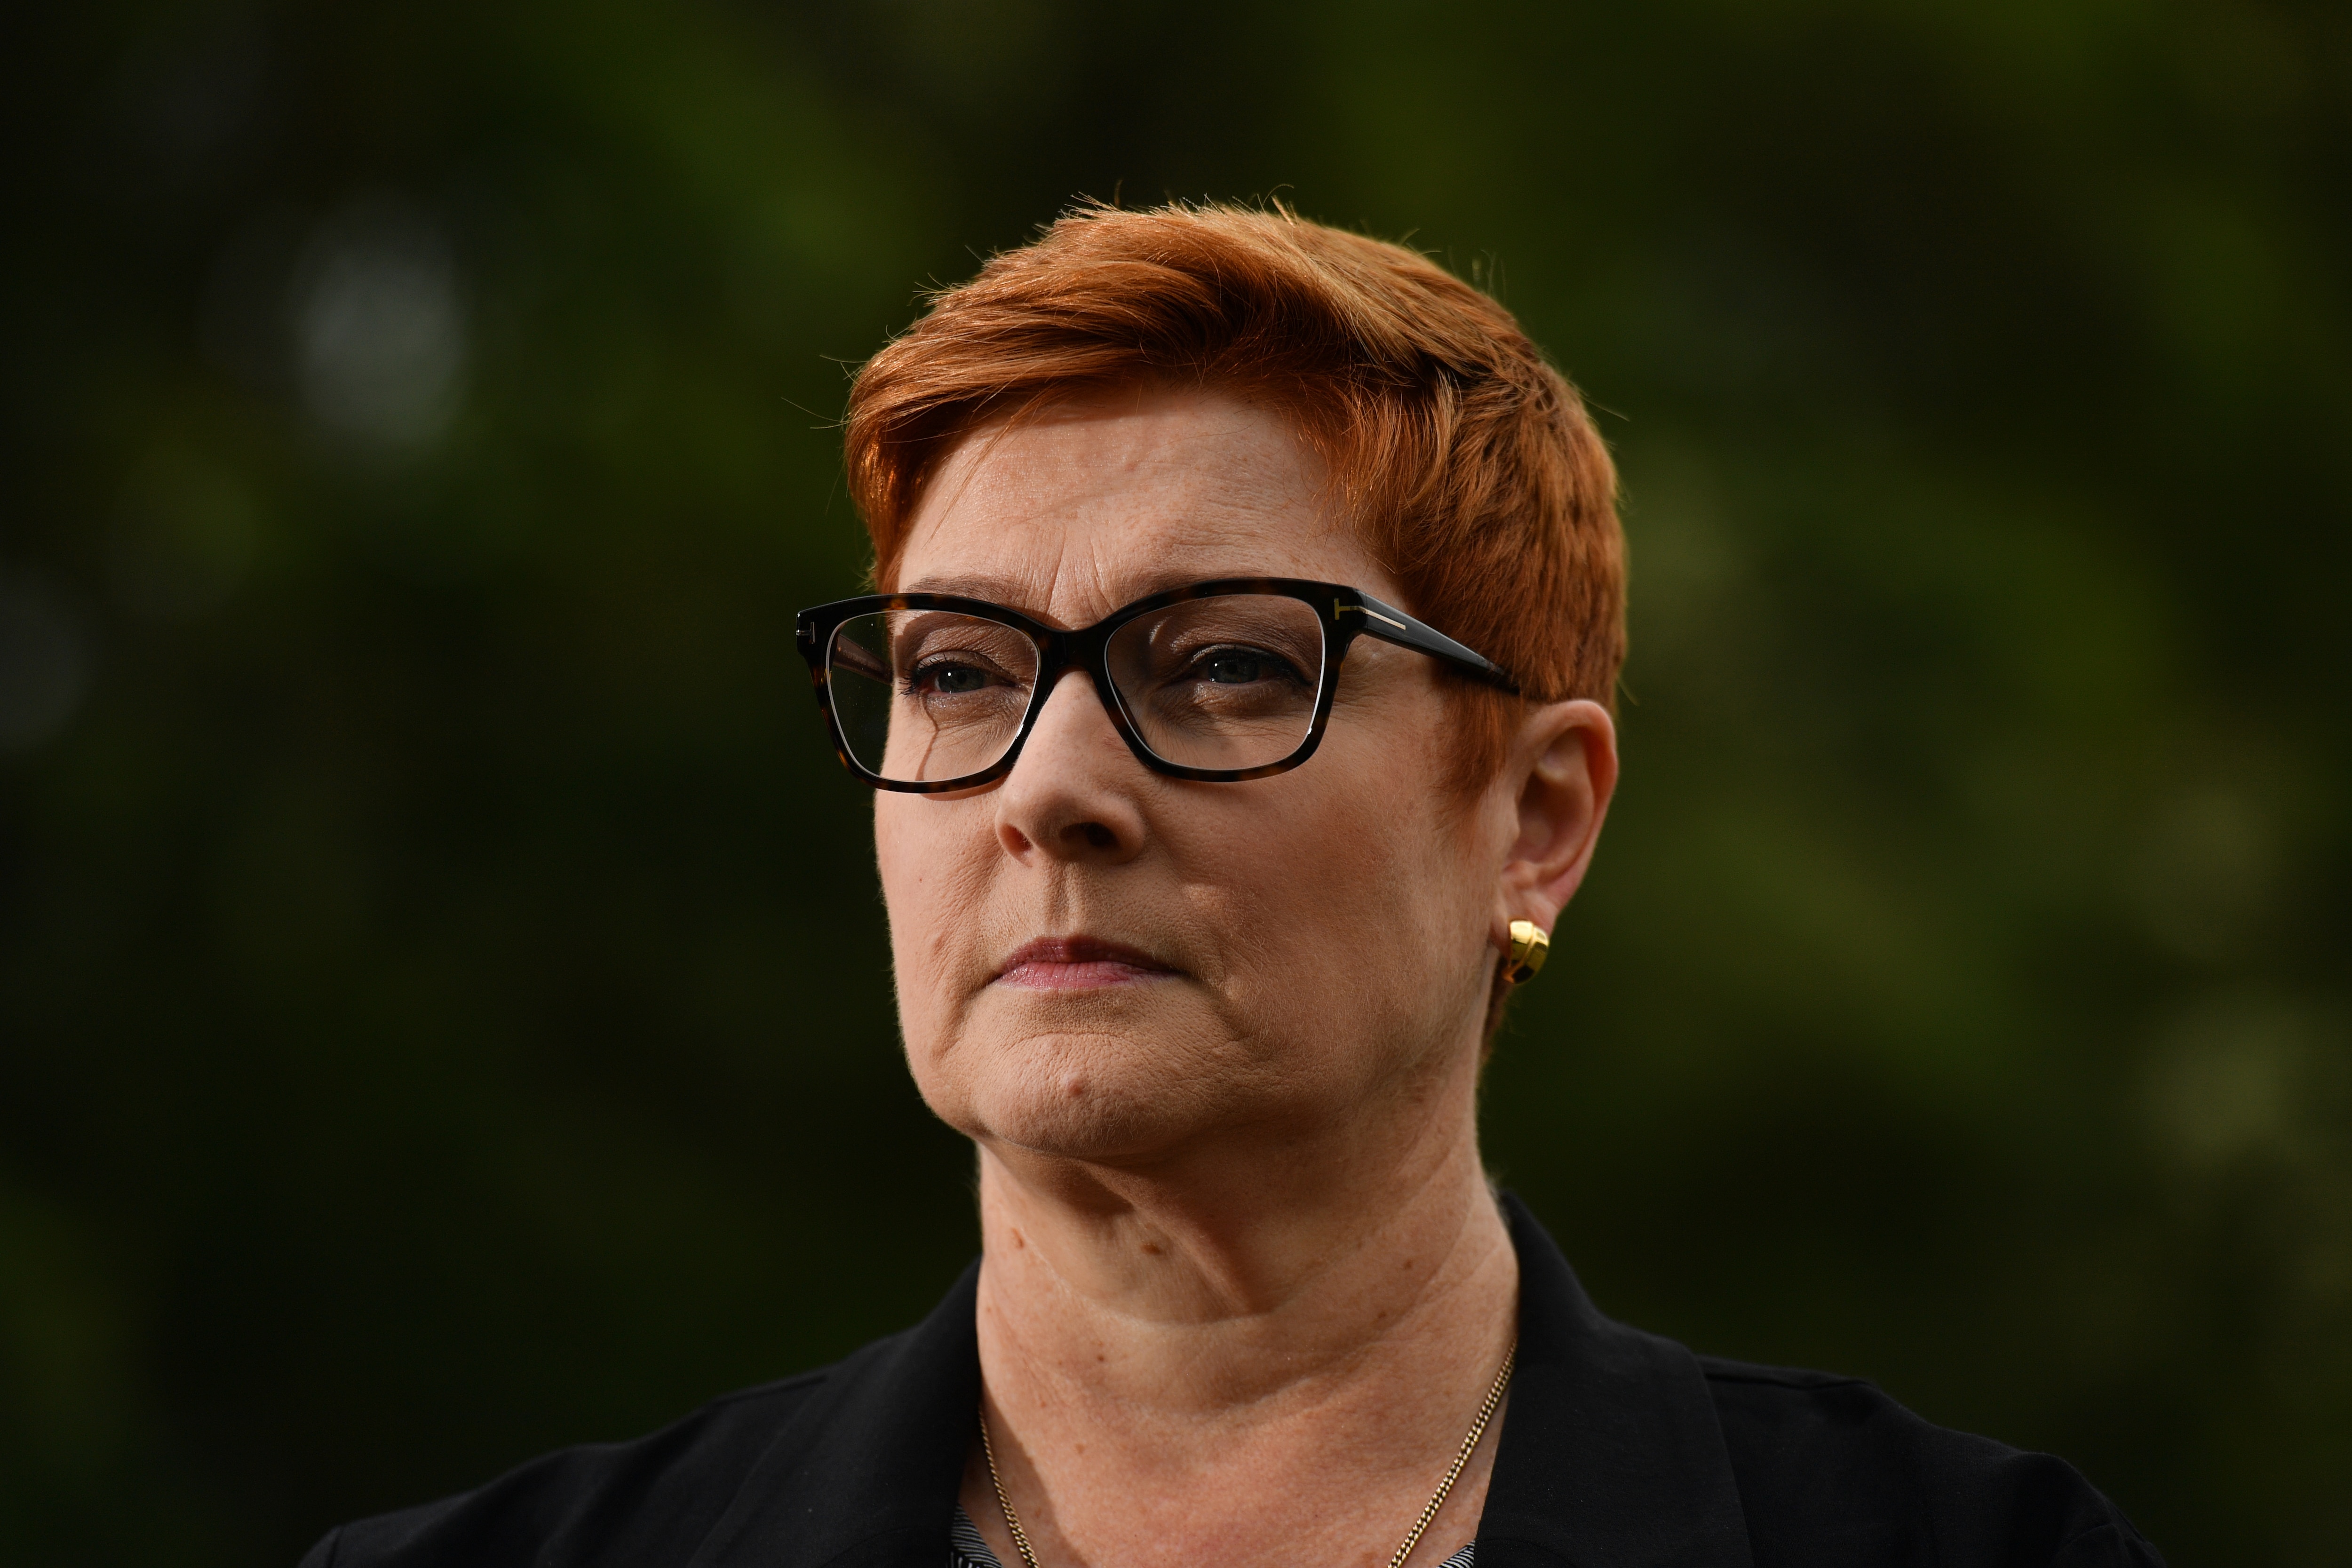 Foreign Minister Marise Payne believes Australia would respect the young royal couple in their bid for greater independence.